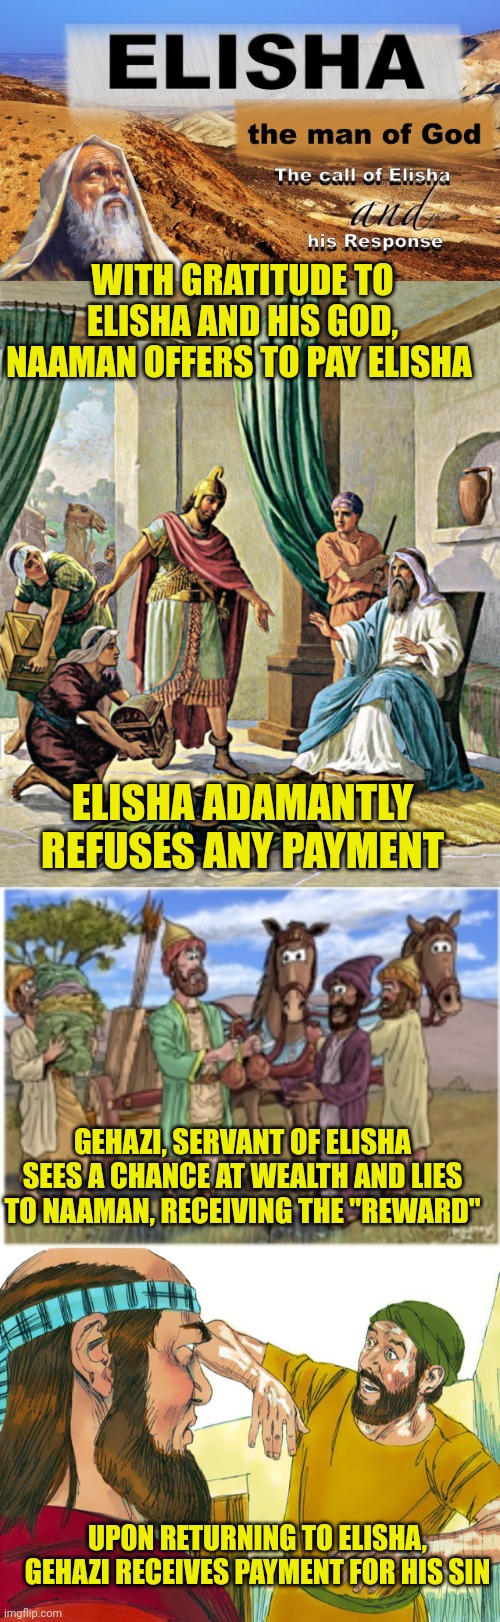 WITH GRATITUDE TO ELISHA AND HIS GOD, NAAMAN OFFERS TO PAY ELISHA; ELISHA ADAMANTLY REFUSES ANY PAYMENT; GEHAZI, SERVANT OF ELISHA SEES A CHANCE AT WEALTH AND LIES TO NAAMAN, RECEIVING THE "REWARD"; UPON RETURNING TO ELISHA, GEHAZI RECEIVES PAYMENT FOR HIS SIN | image tagged in elisha,naaman wishes to pay elisha,elisha's servant lies to naaman,greedy servant gets his payment | made w/ Imgflip meme maker